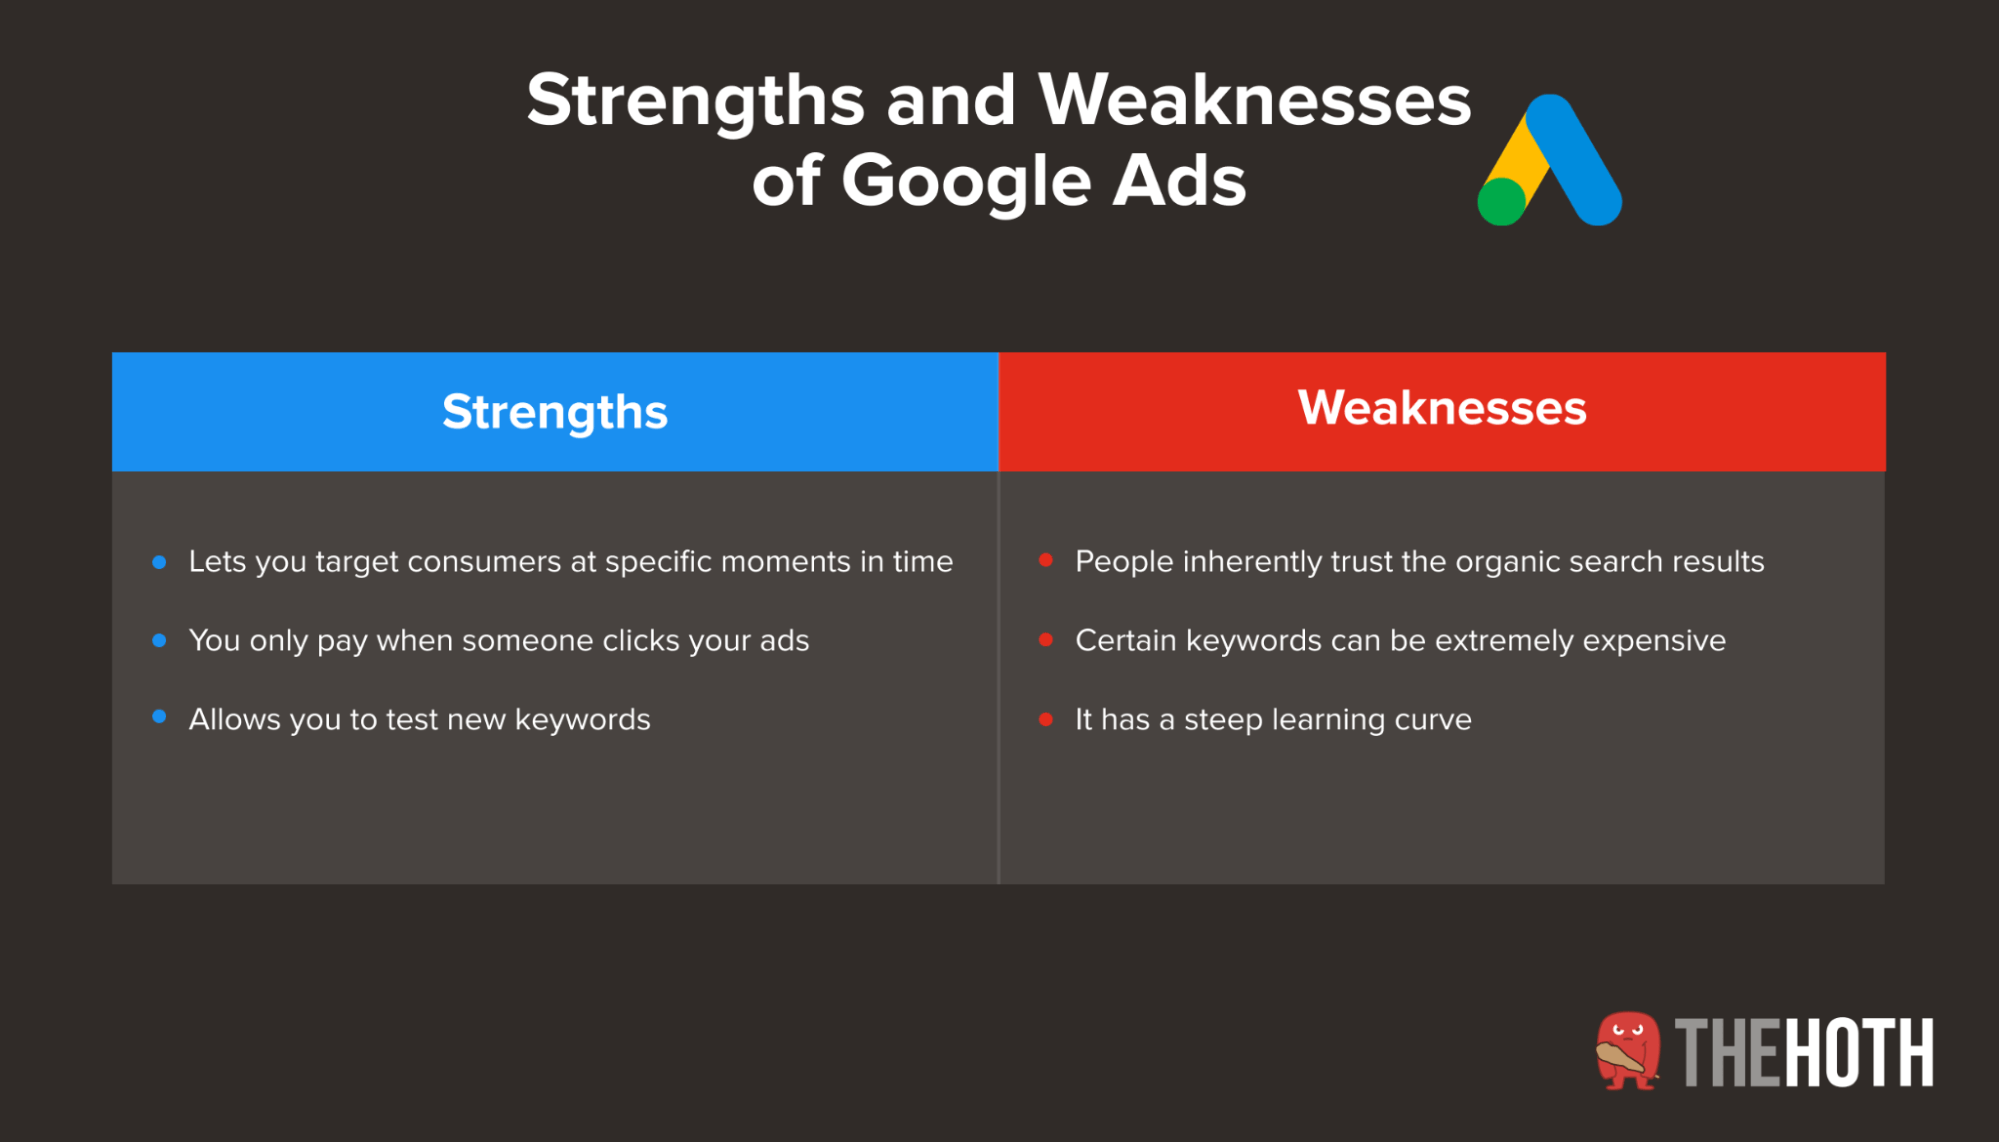 Strengths and weaknesses of Google Ads